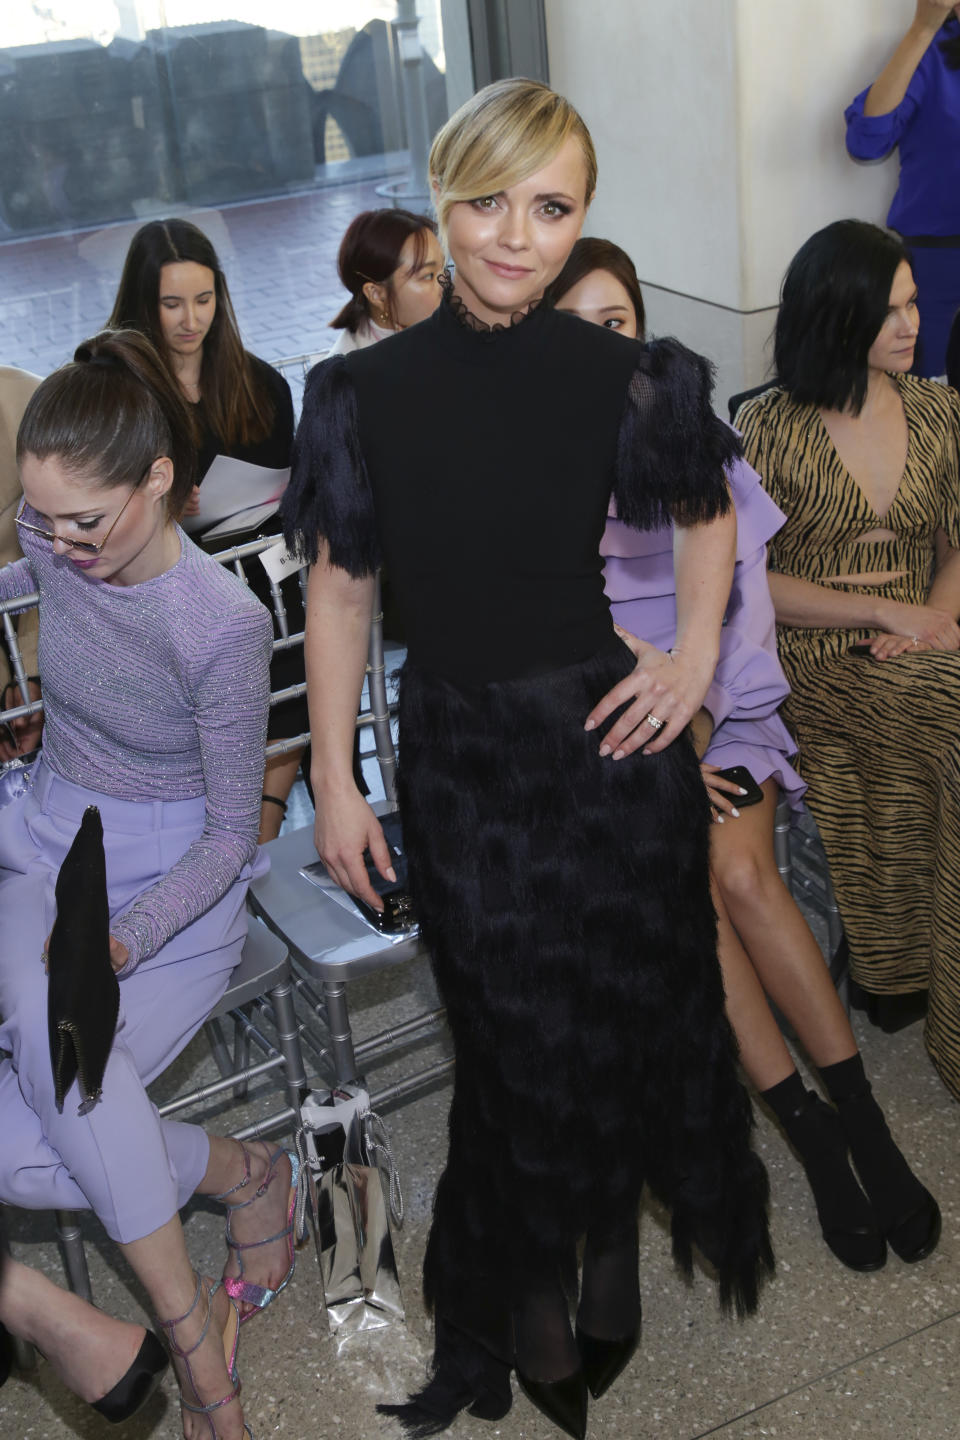 FILE - Actress Christina Ricci attends the Christian Siriano Runway Show during New York Fashion Week on Feb. 9, 2019, in New York. Ricci turns 41 on Feb. 12. (Photo by Brent N. Clarke/Invision/AP, File)